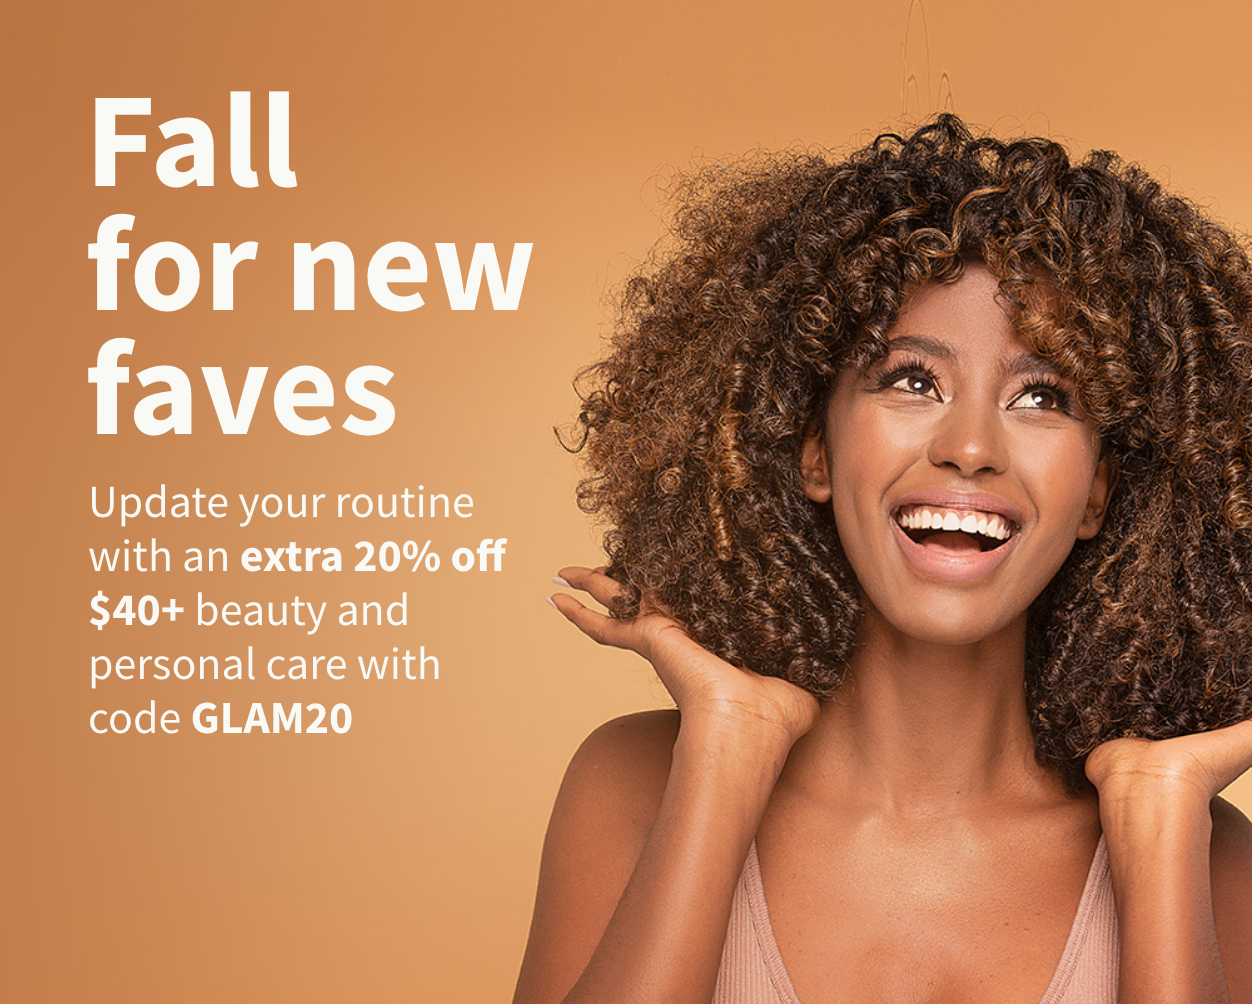 Fall for new faves. Update your routine with an extra 20% off $40+ beauty and personal care with code GLAM20